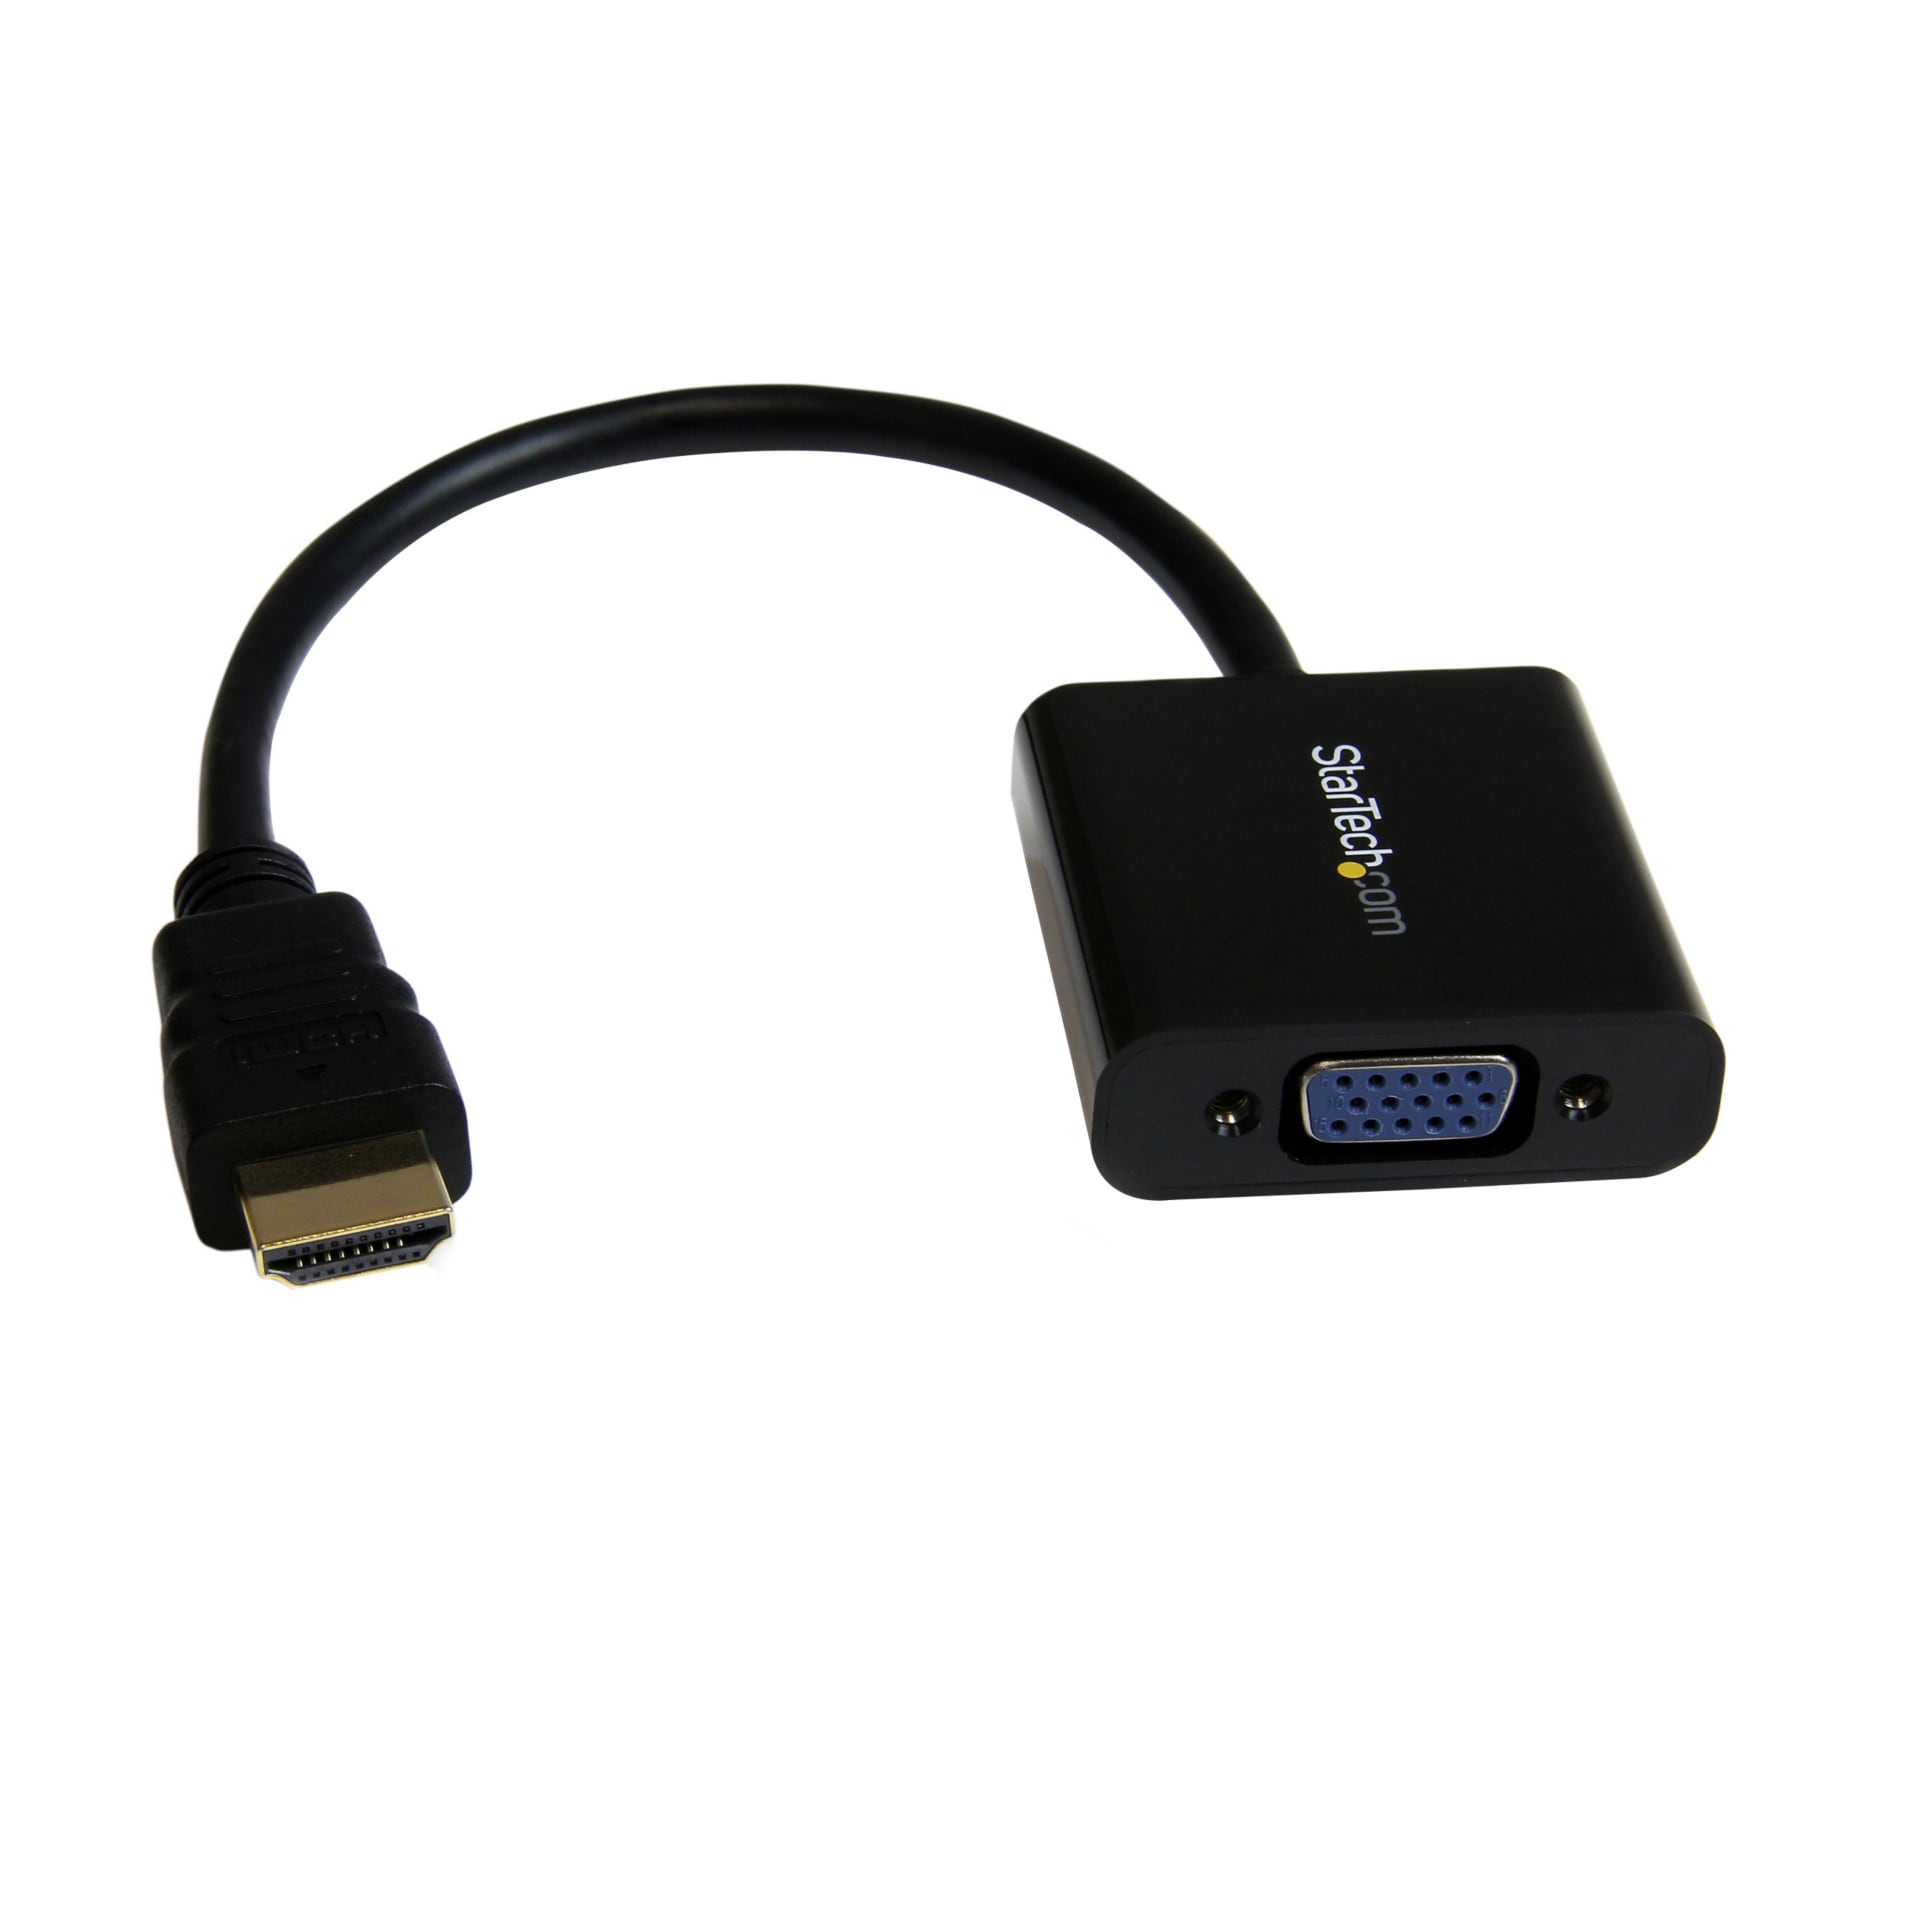 Stranden Siden Byg op StarTech.com HDMI to VGA Adapter - Active Monitor Converter Cable - 1080p -  HD2VGAE2 - Monitor Cables & Adapters - CDW.com